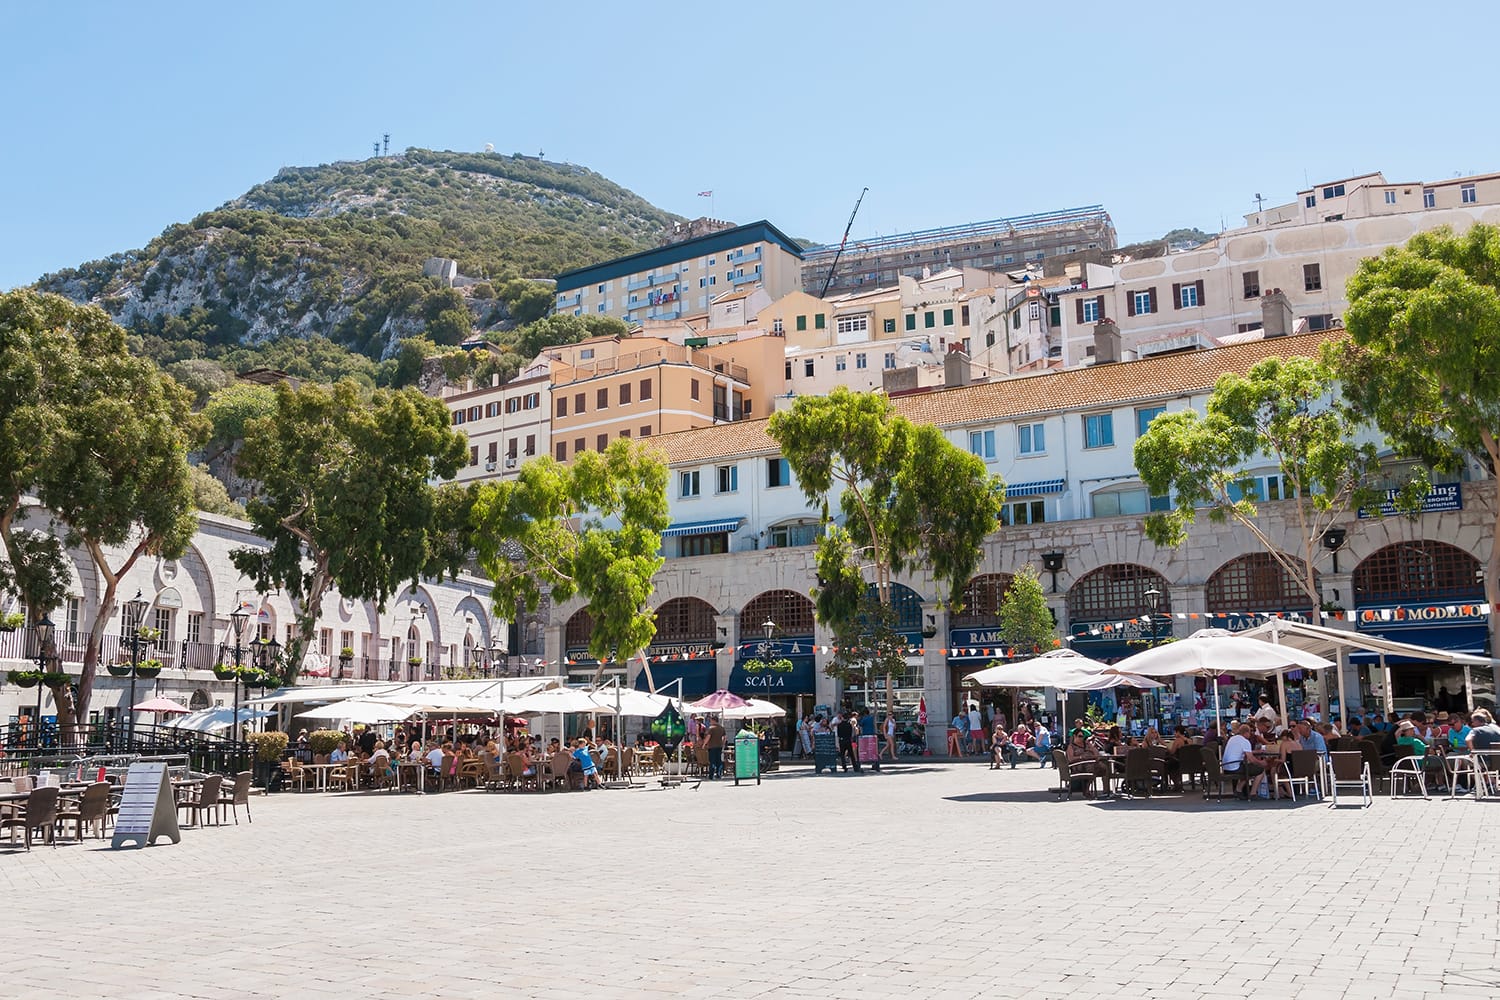 View of Grand Casemates Square. The square is lined with numerous pubs, bars and restaurants and acts as the gateway into Gibraltar's city centre.